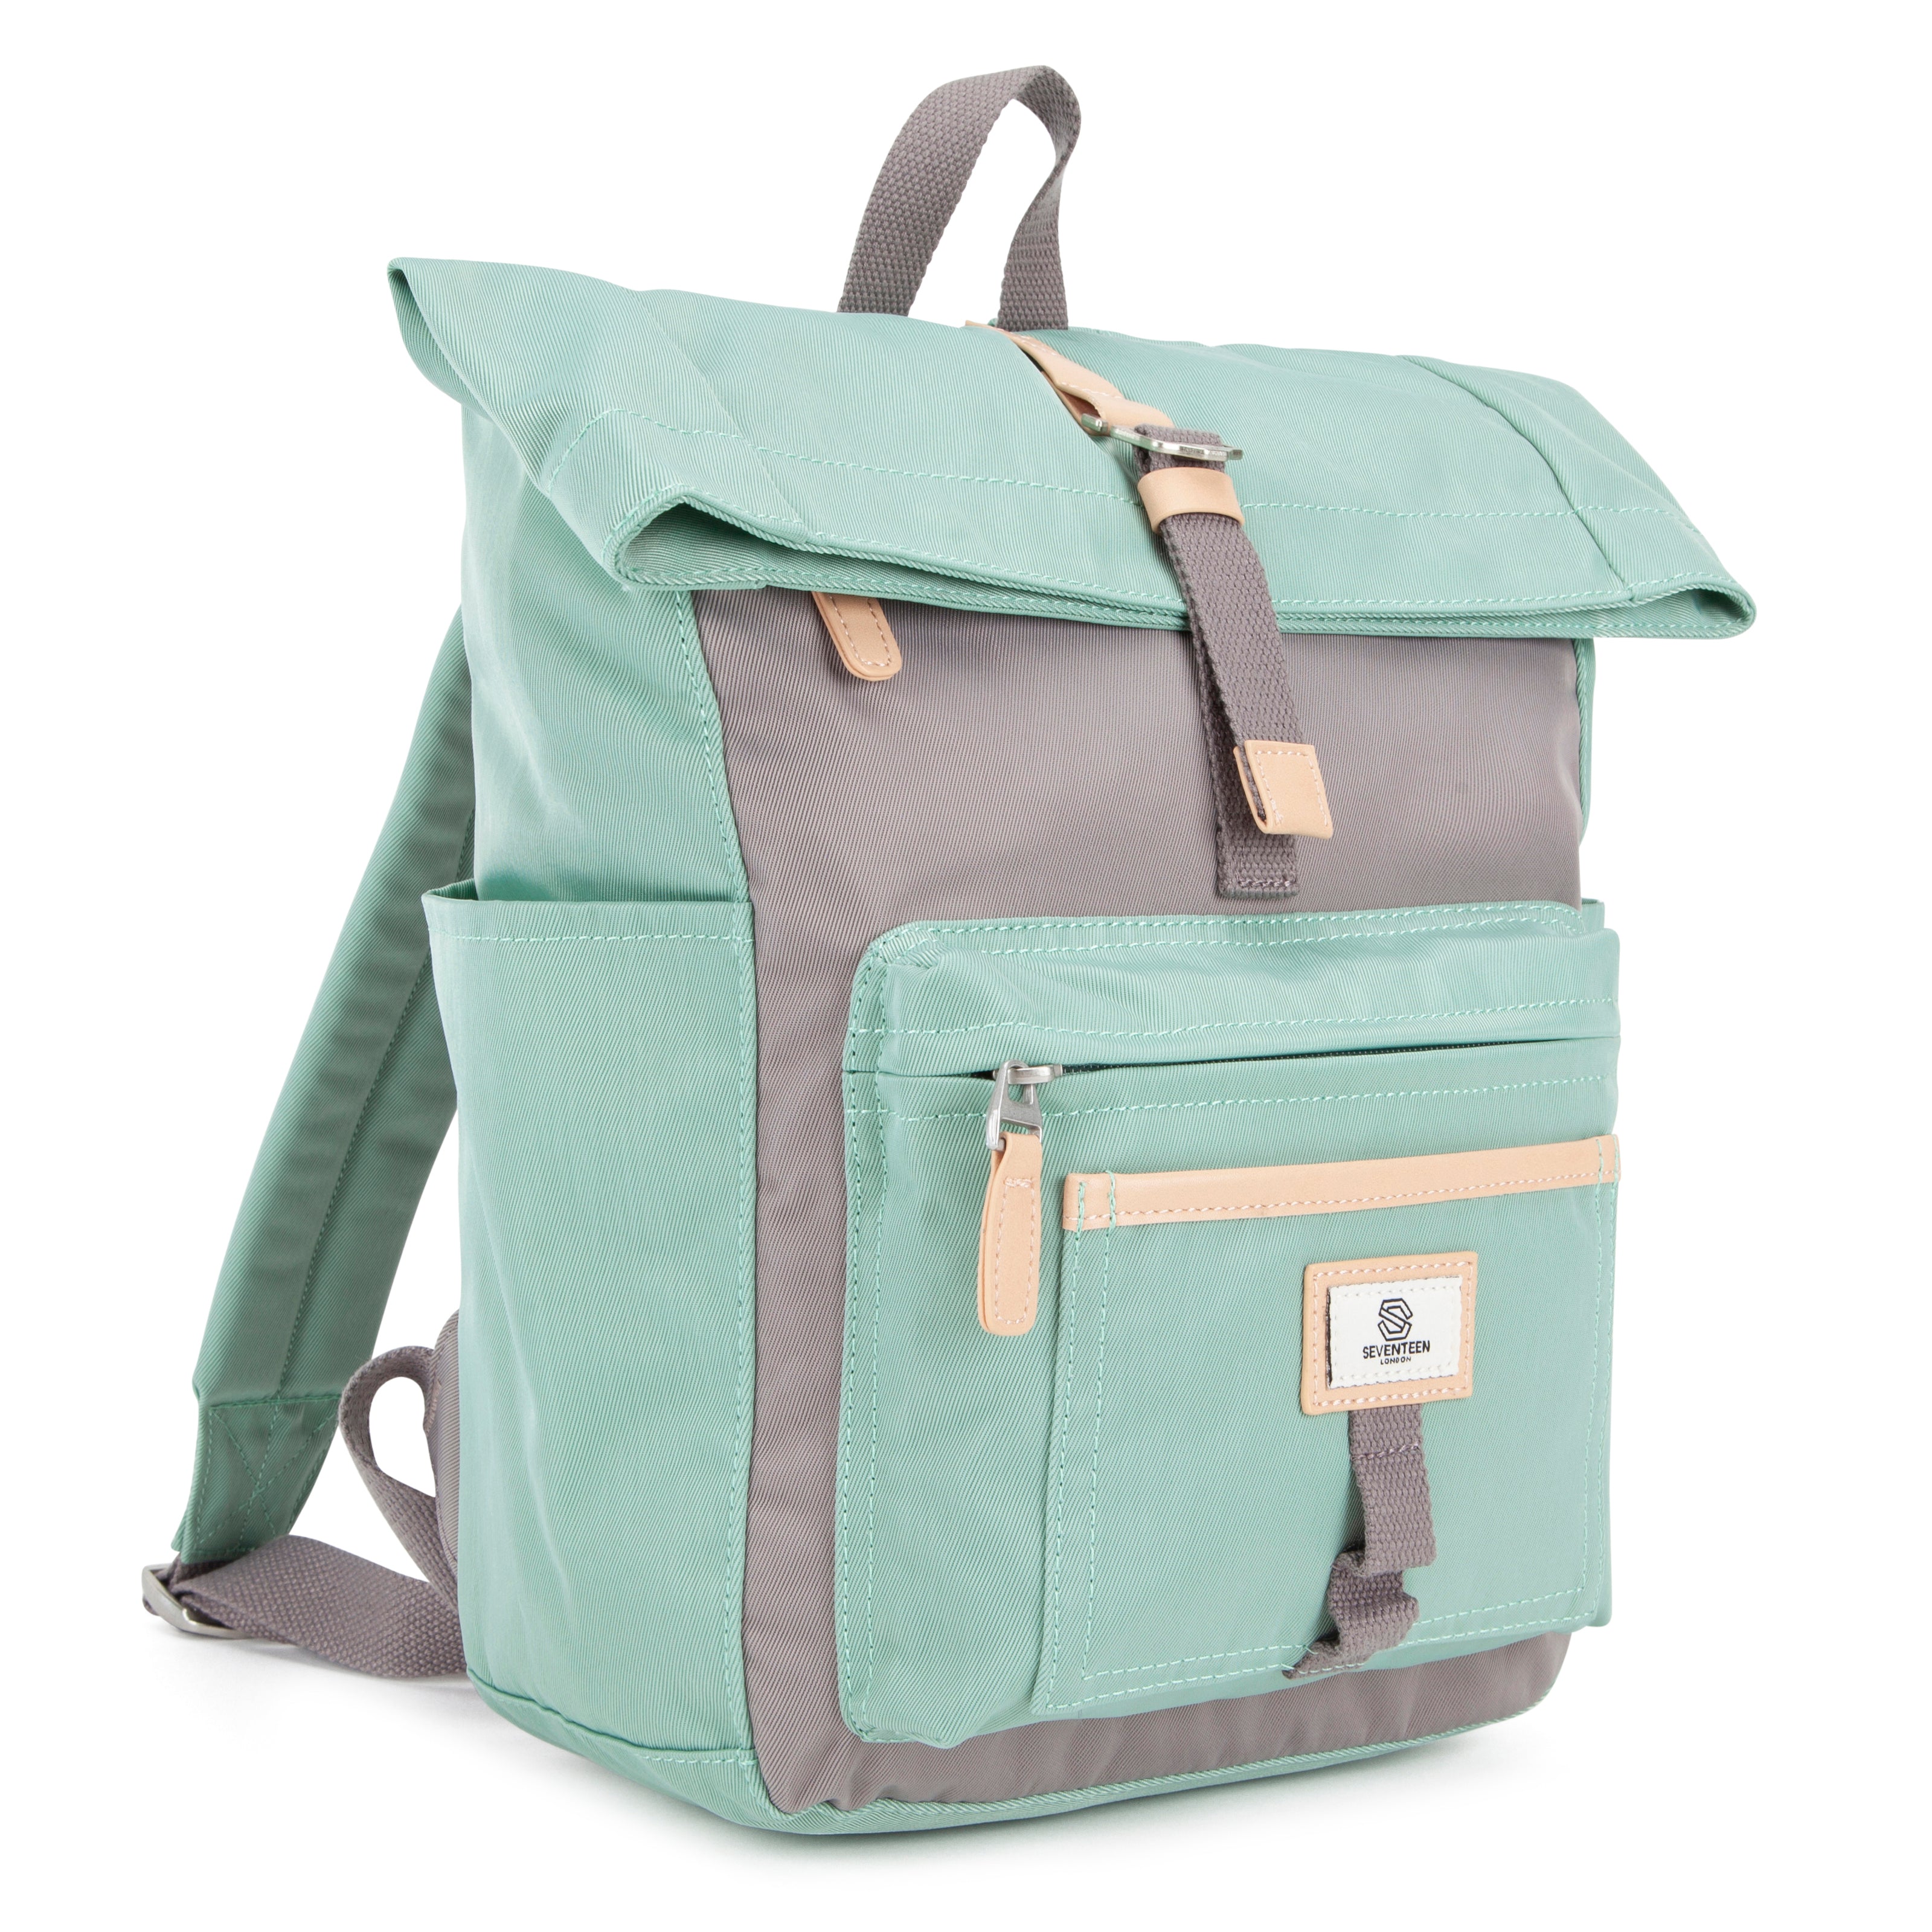 Canary Wharf Mini Backpack - Pastel Green with Grey - Seventeen London